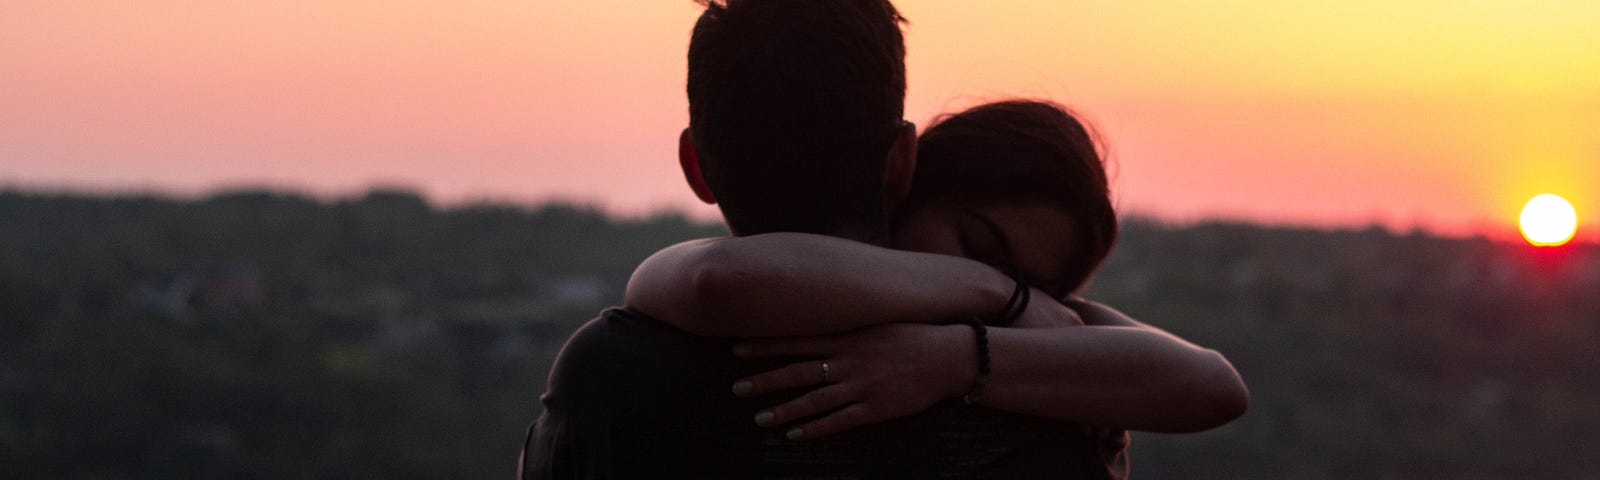 Two people hugging, silhouetted against the sunset. A lake behind them reflects the orange light.